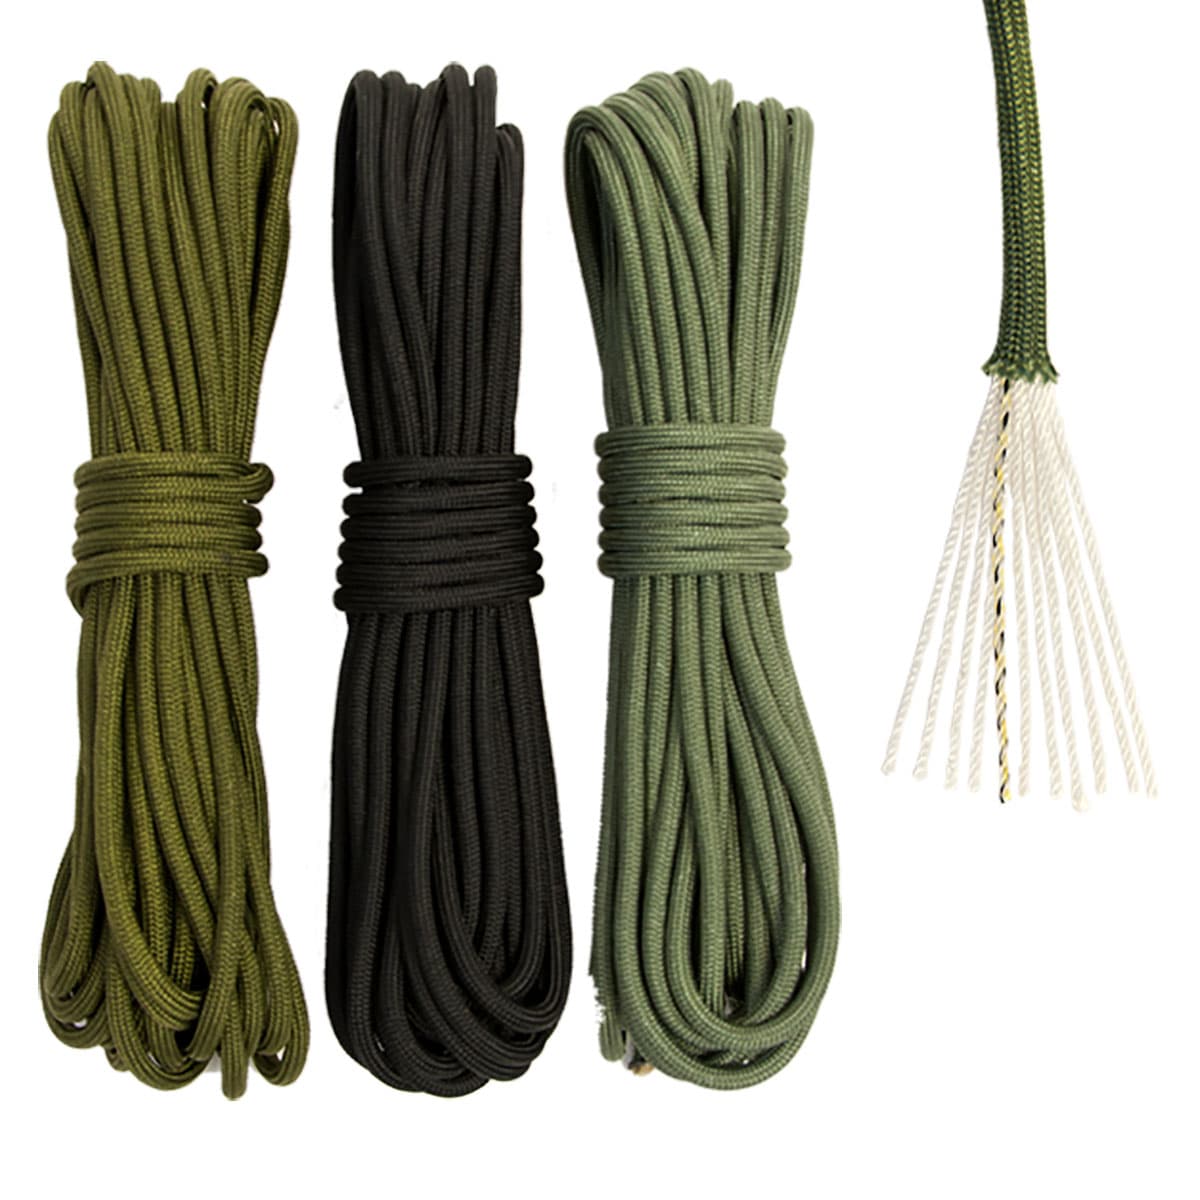 750 750lb Paracord/Parachute Cord 103ft 100% Nylon 750 Paracord 750 -  Genuine Mil Spec Type IV 750lb Paracord Used by The US Military  (MIl-C-5040-H)